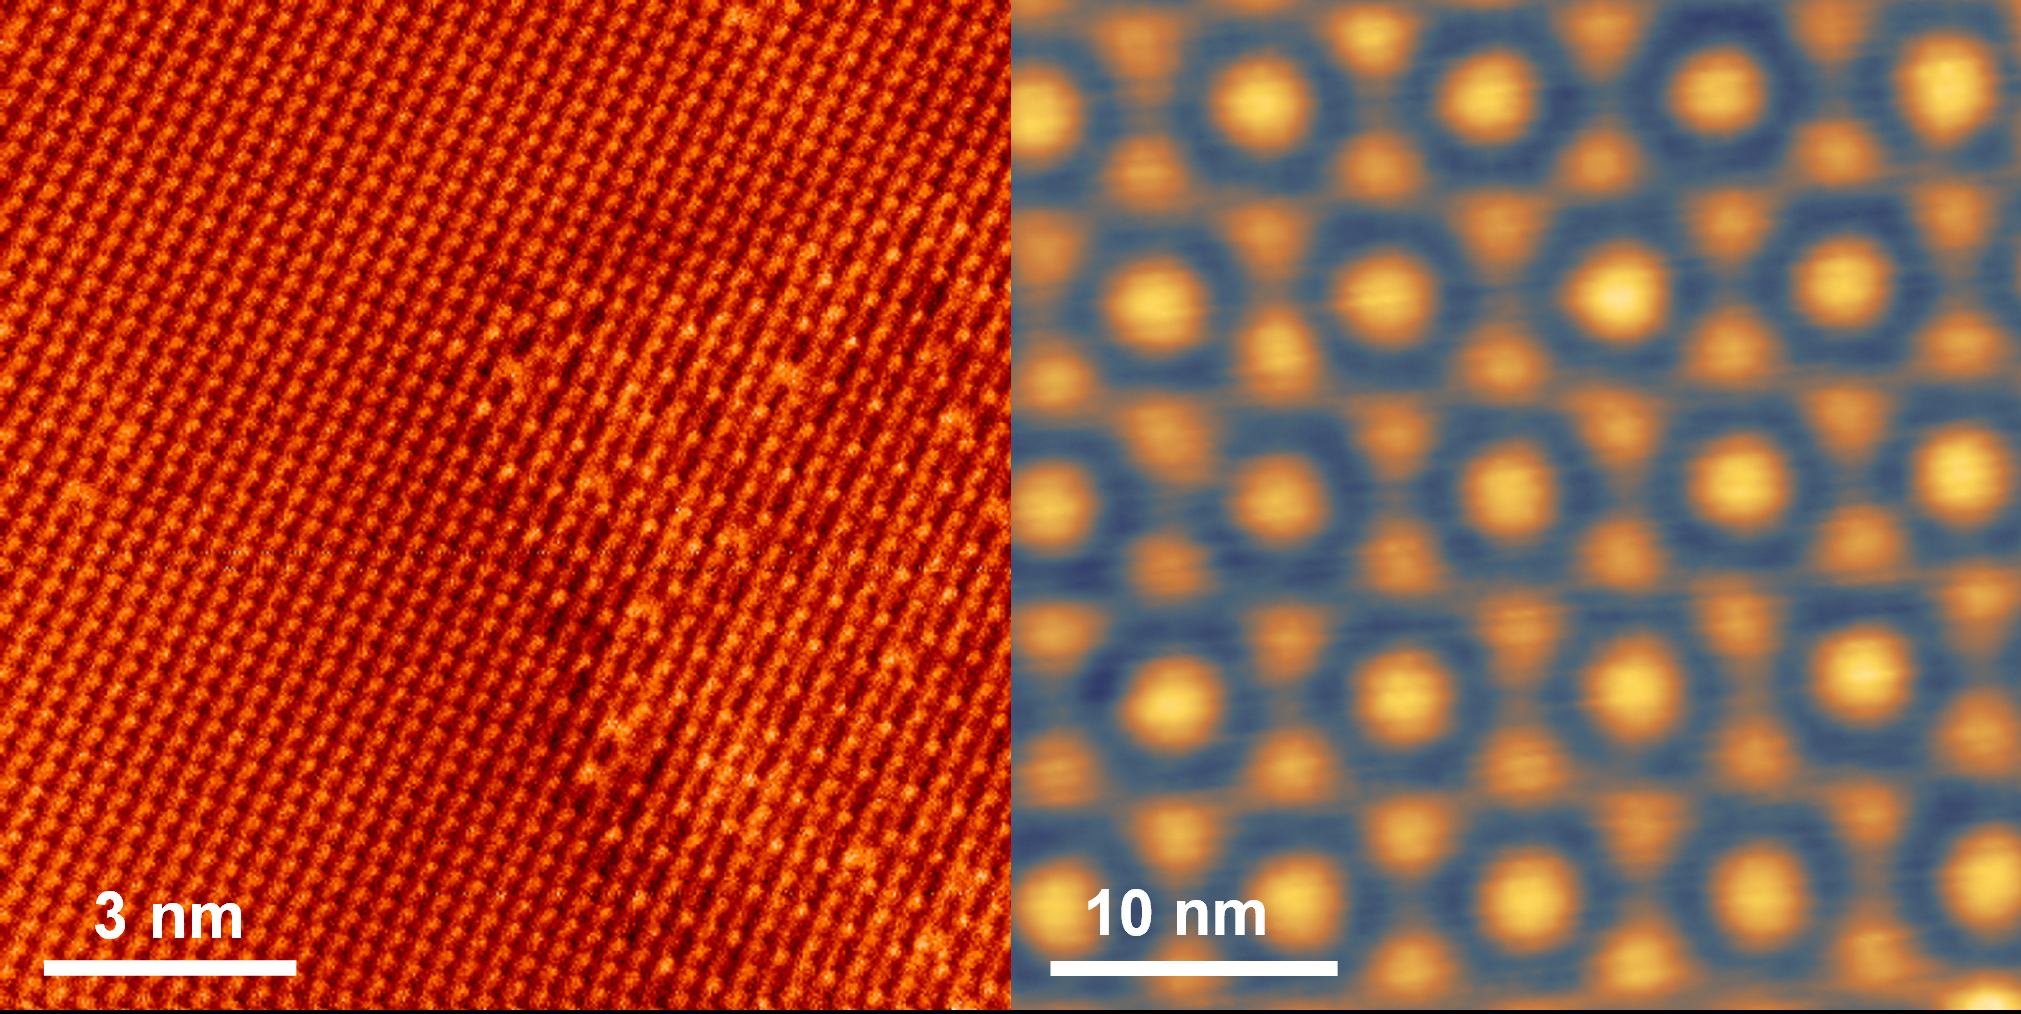 A split-screen image showing surfaces through AFM and STM imaging.